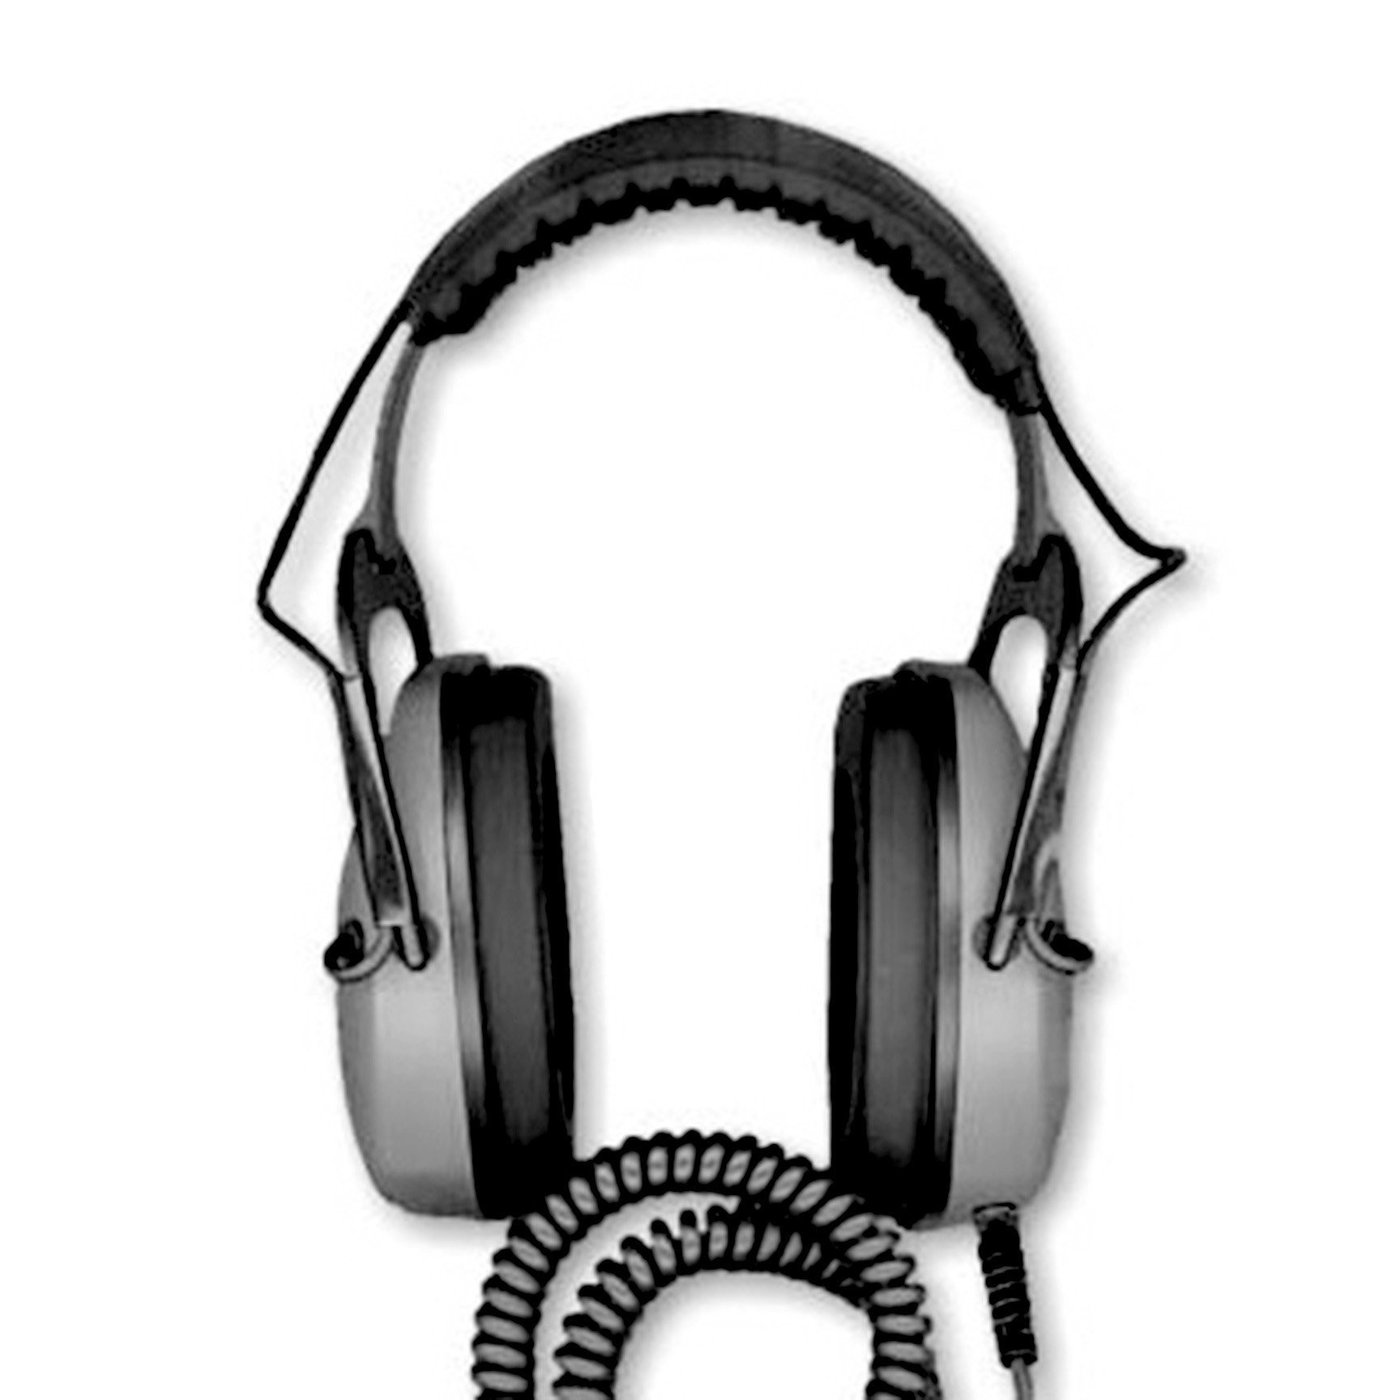 Grey Ghost Headphones with CTX 3030 Connector